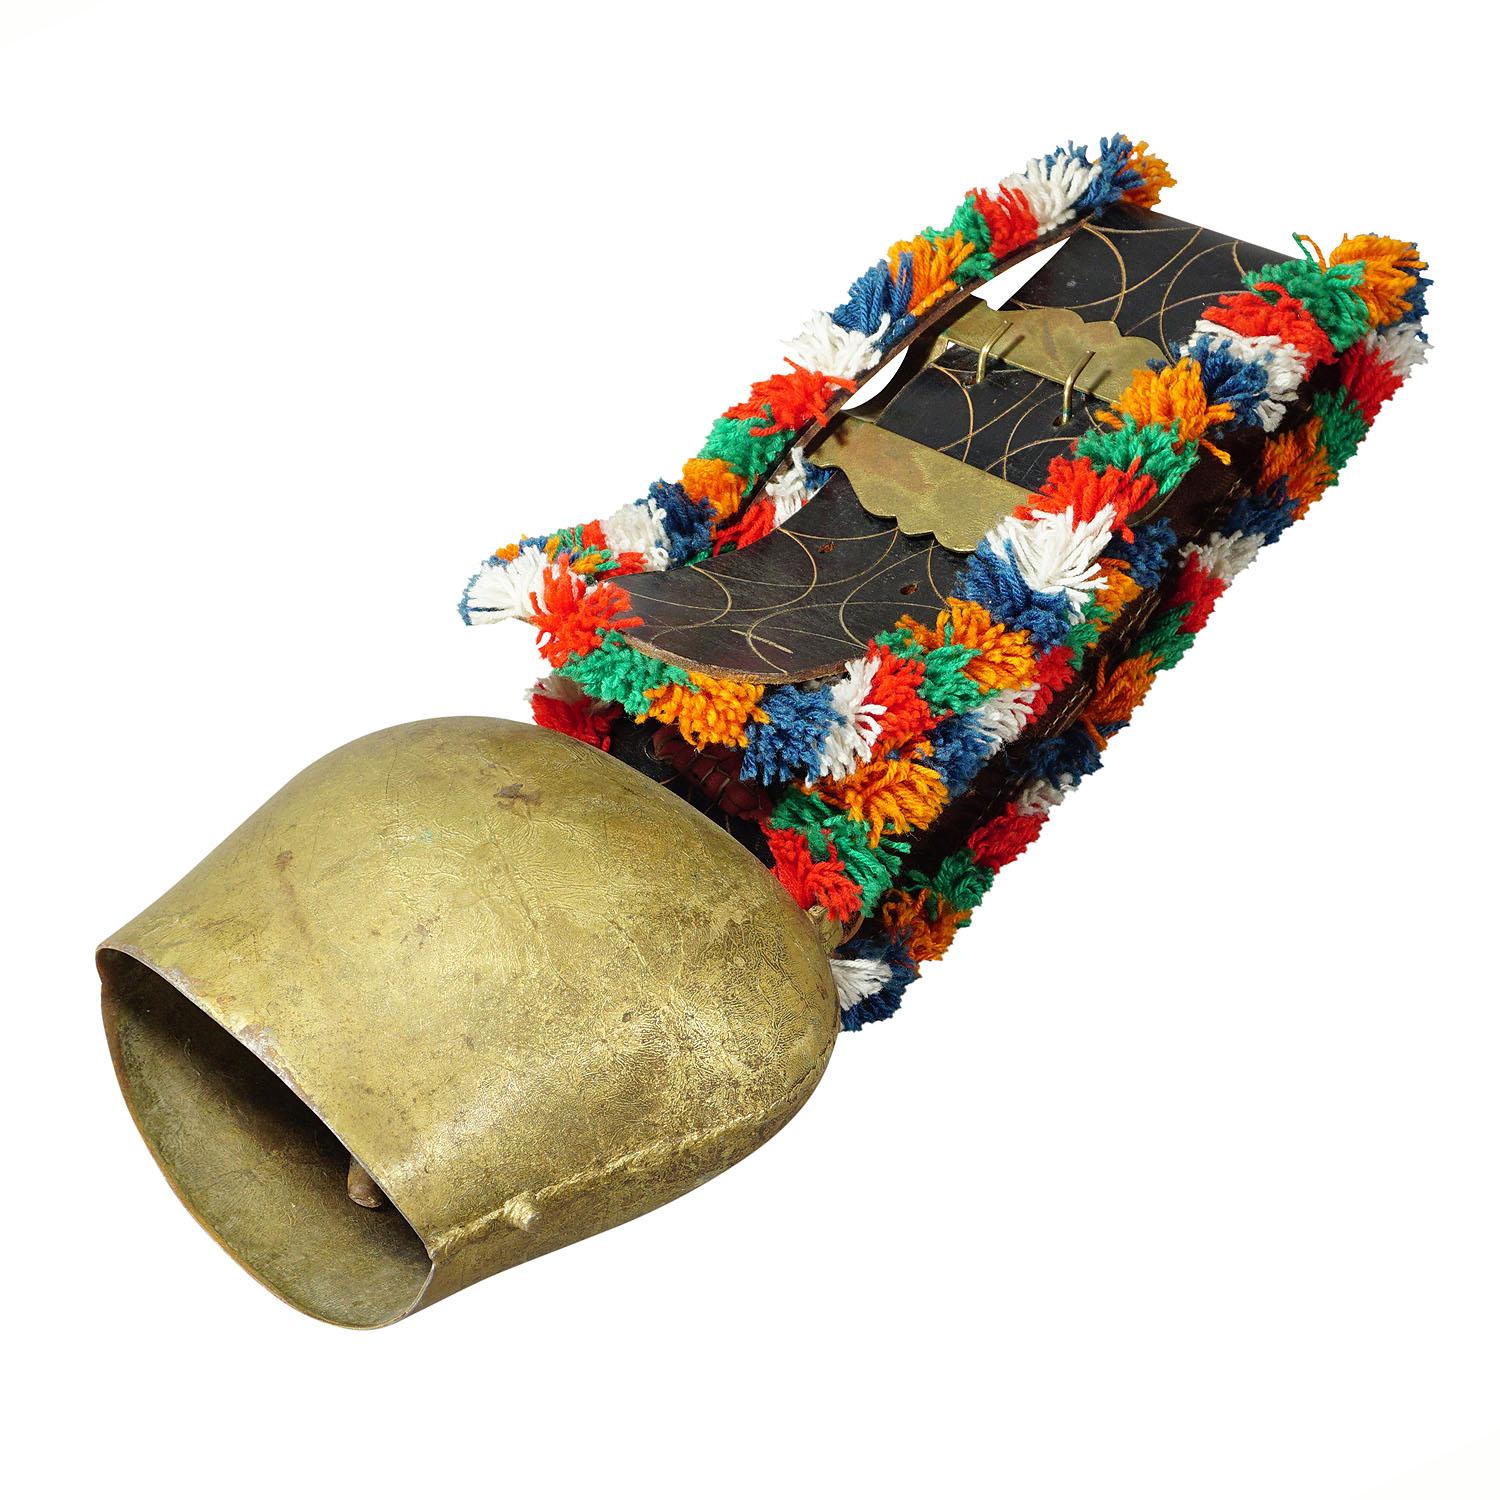 A large handforged cow bell from the Alps region of Switzerland, manufactured around 1950. The bell comes with its original brown leather strap with buckle and colorful wool decoration. These bells are used to locate cattles in the pasture. Cows